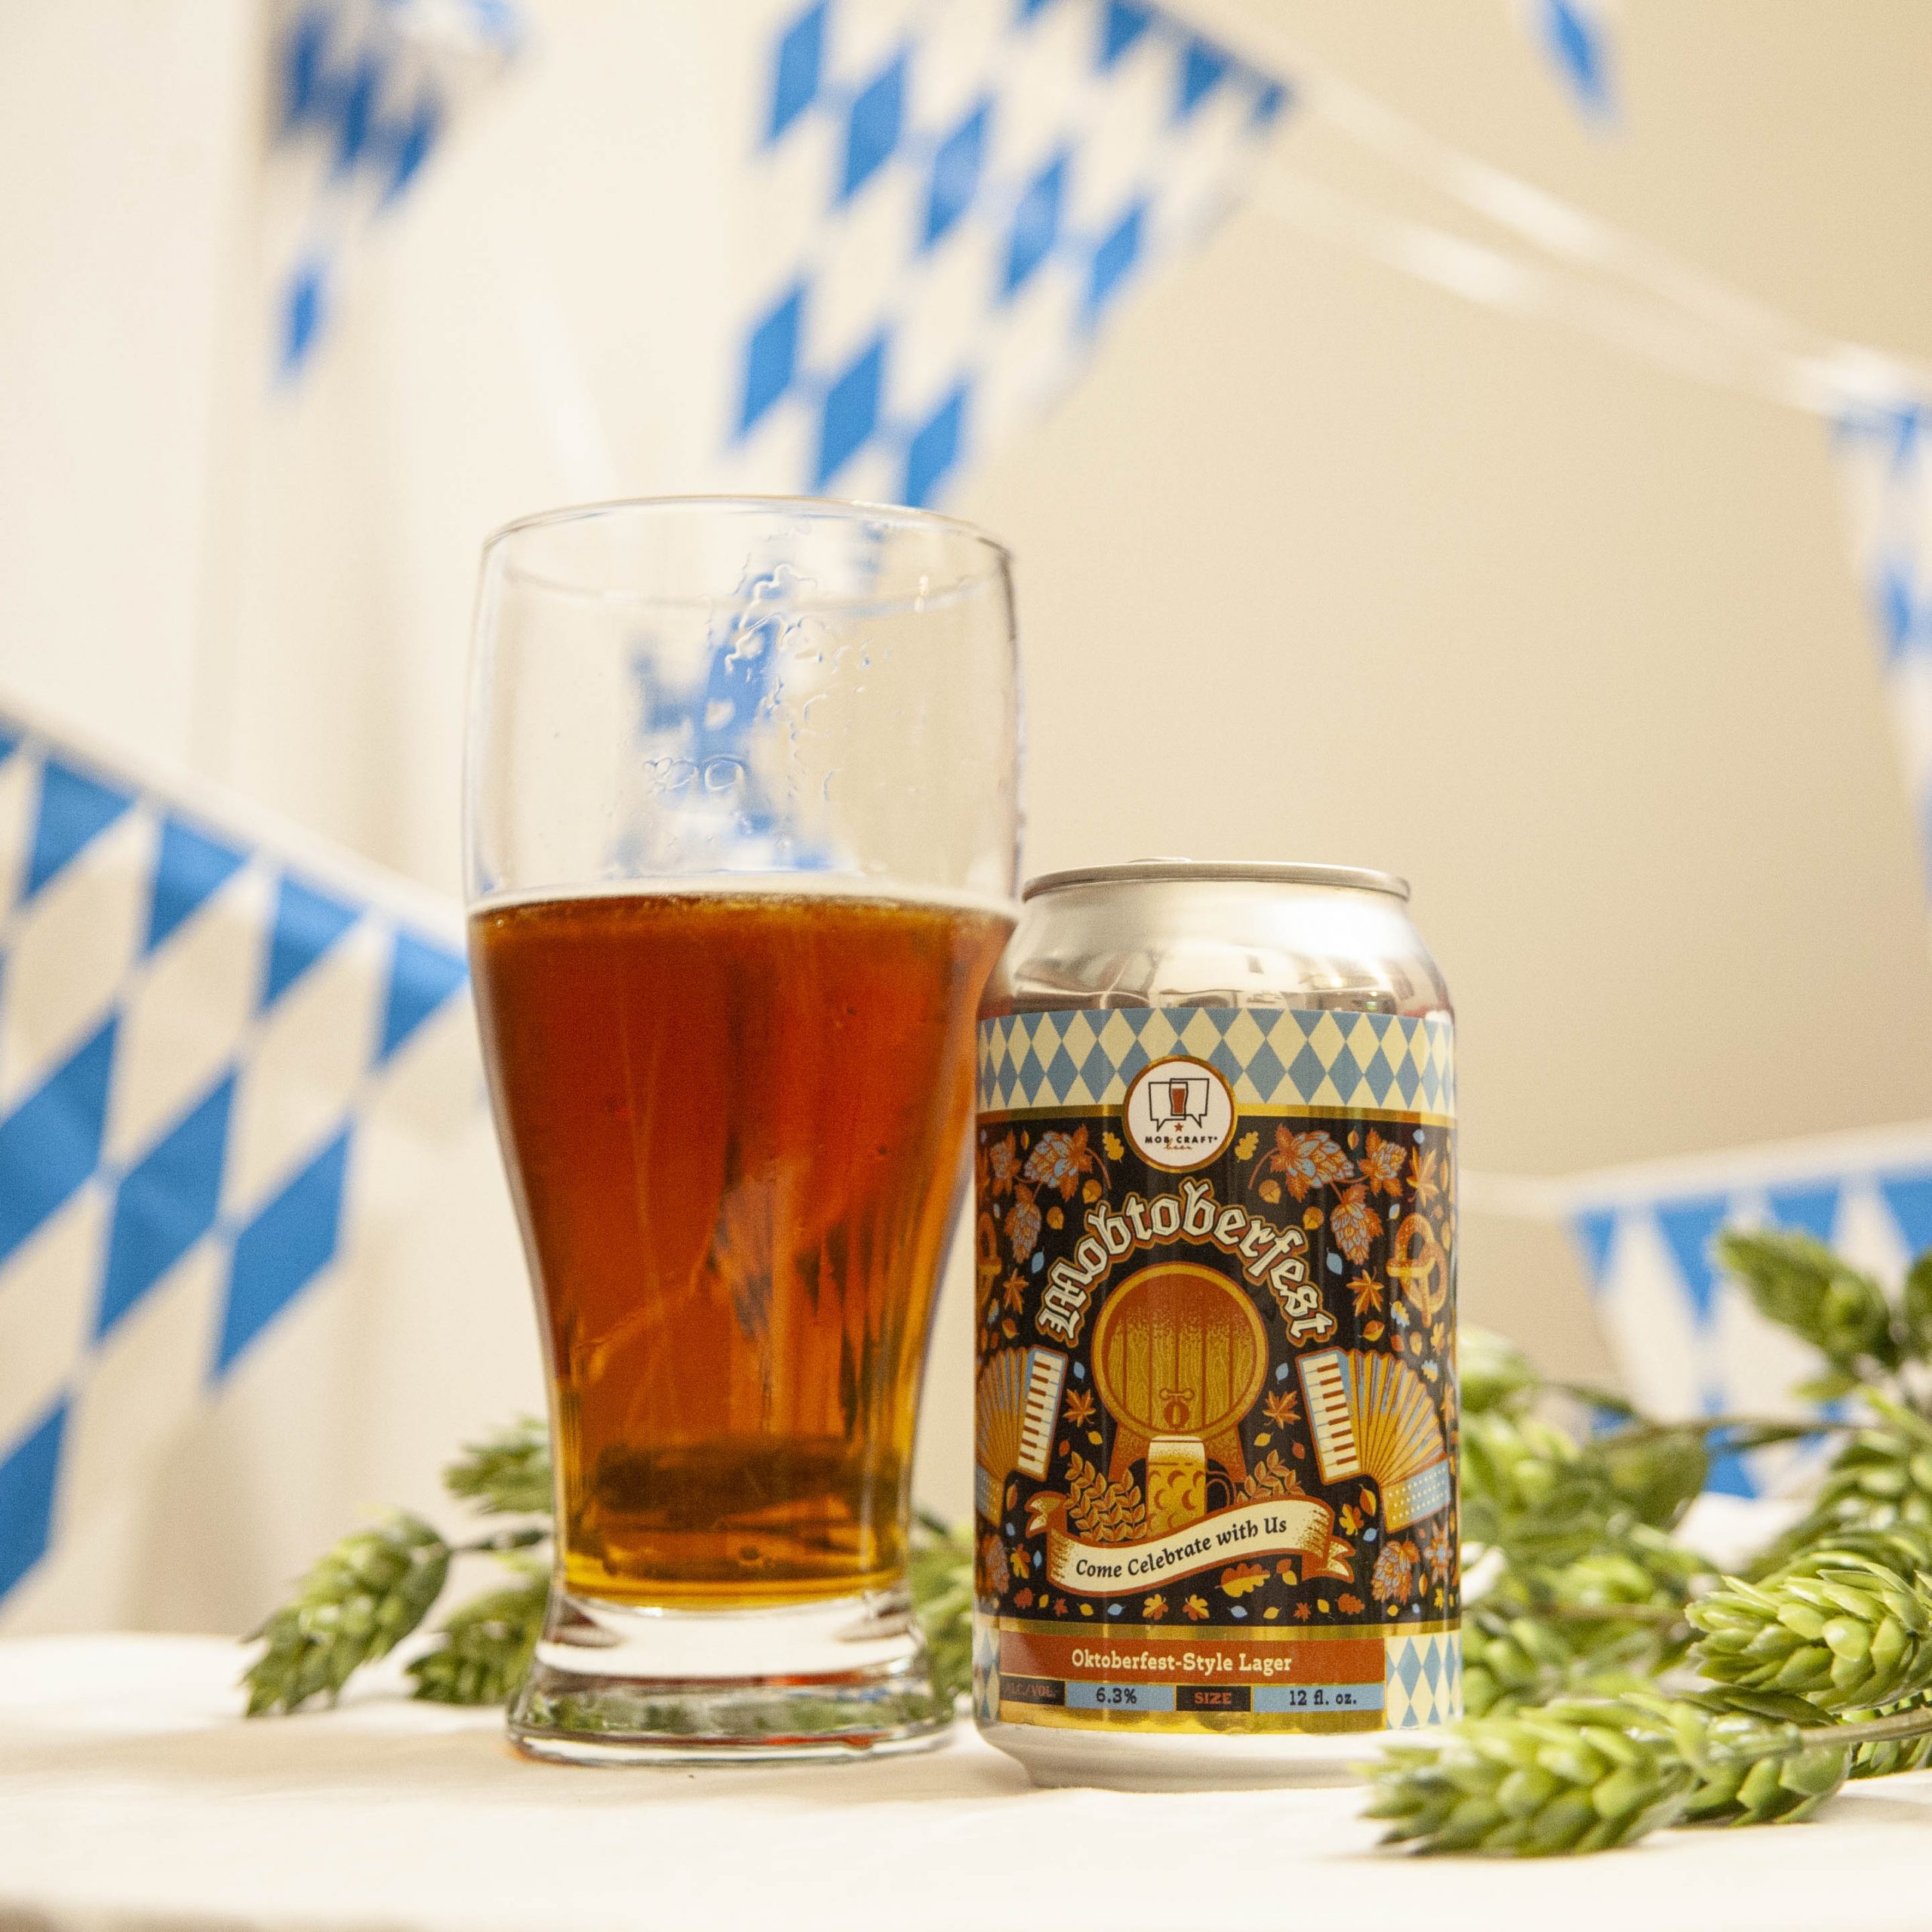 MobCraft's Mobtoberfest is poured into a pilsner glass amidst hop cones and blue and white bunting. 